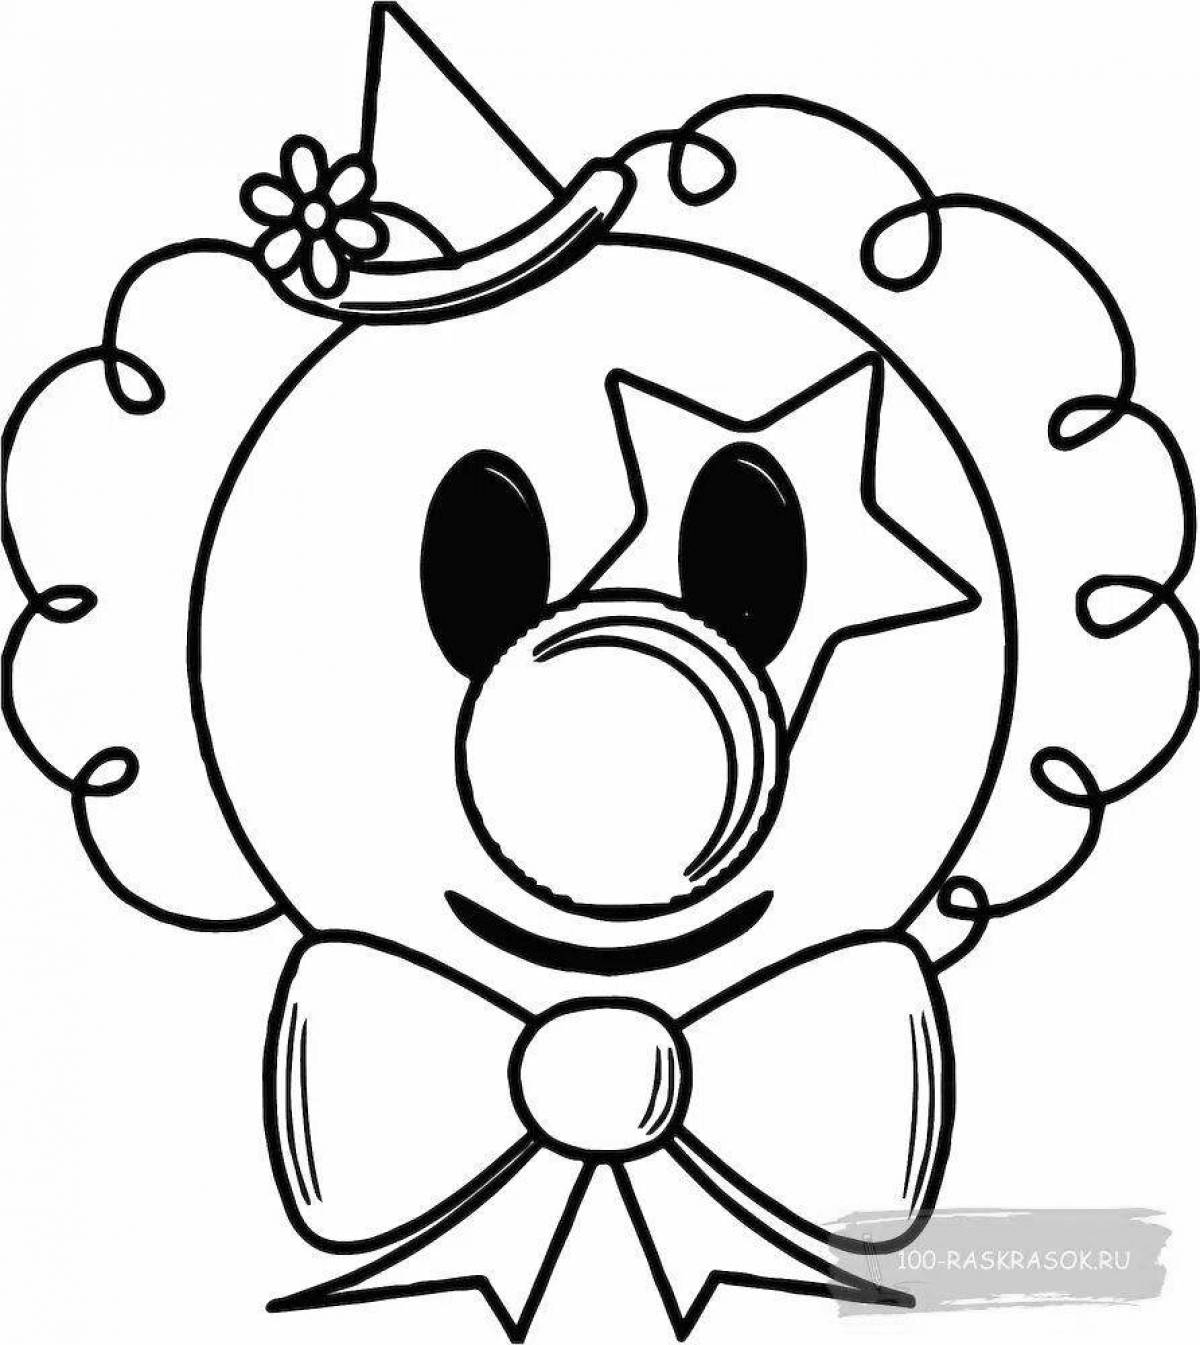 Attractive clown face coloring page for kids